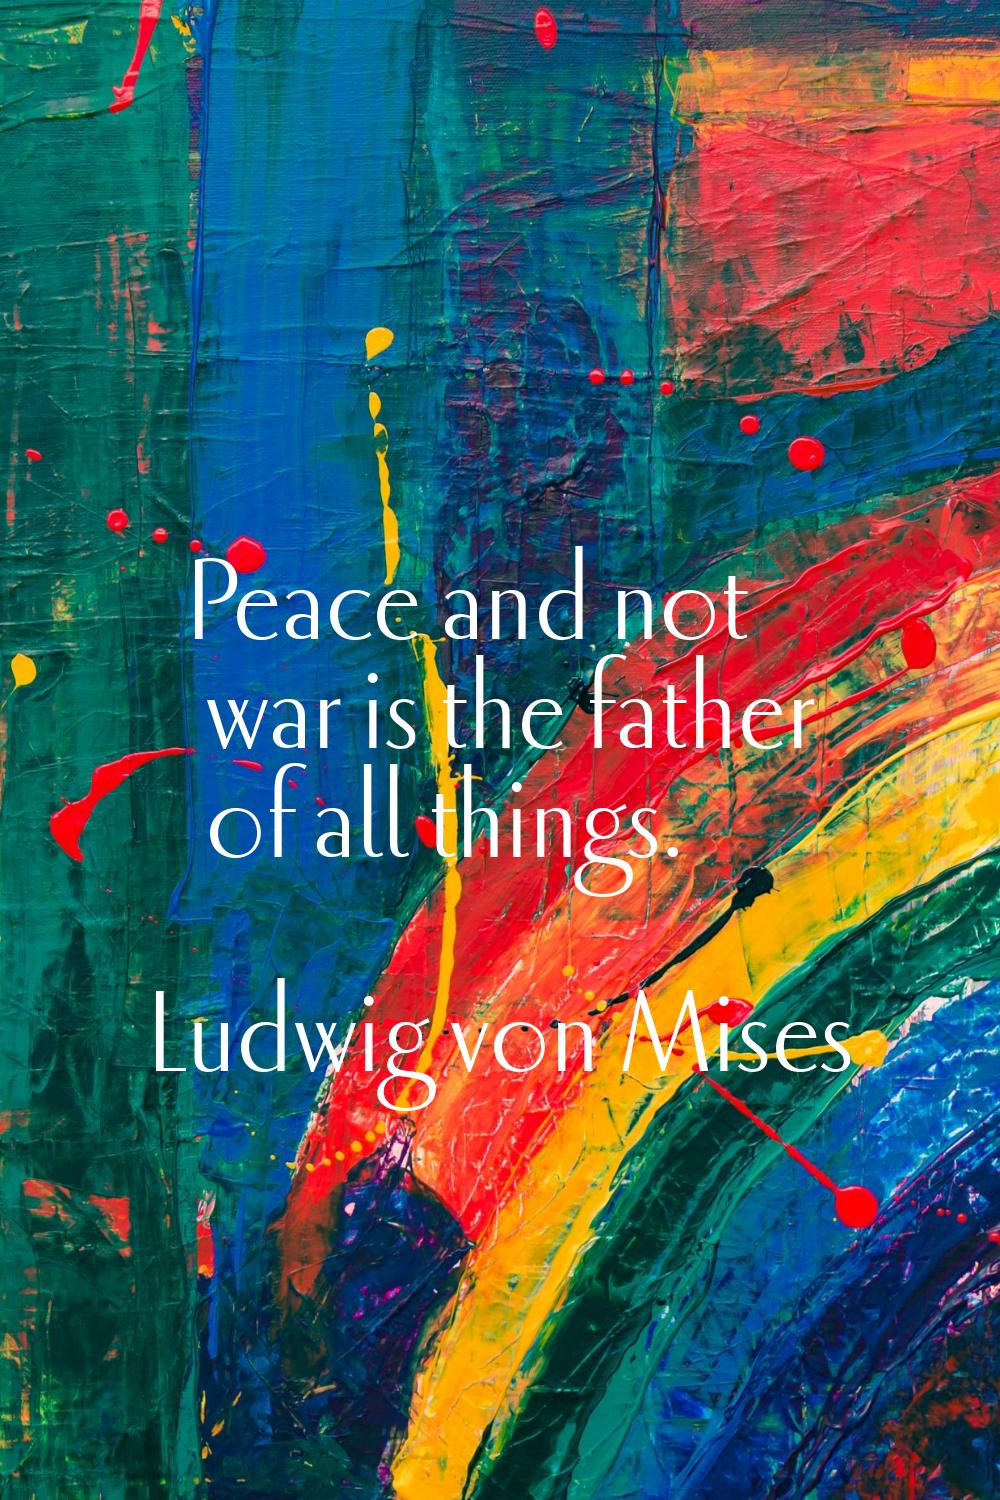 Peace and not war is the father of all things.